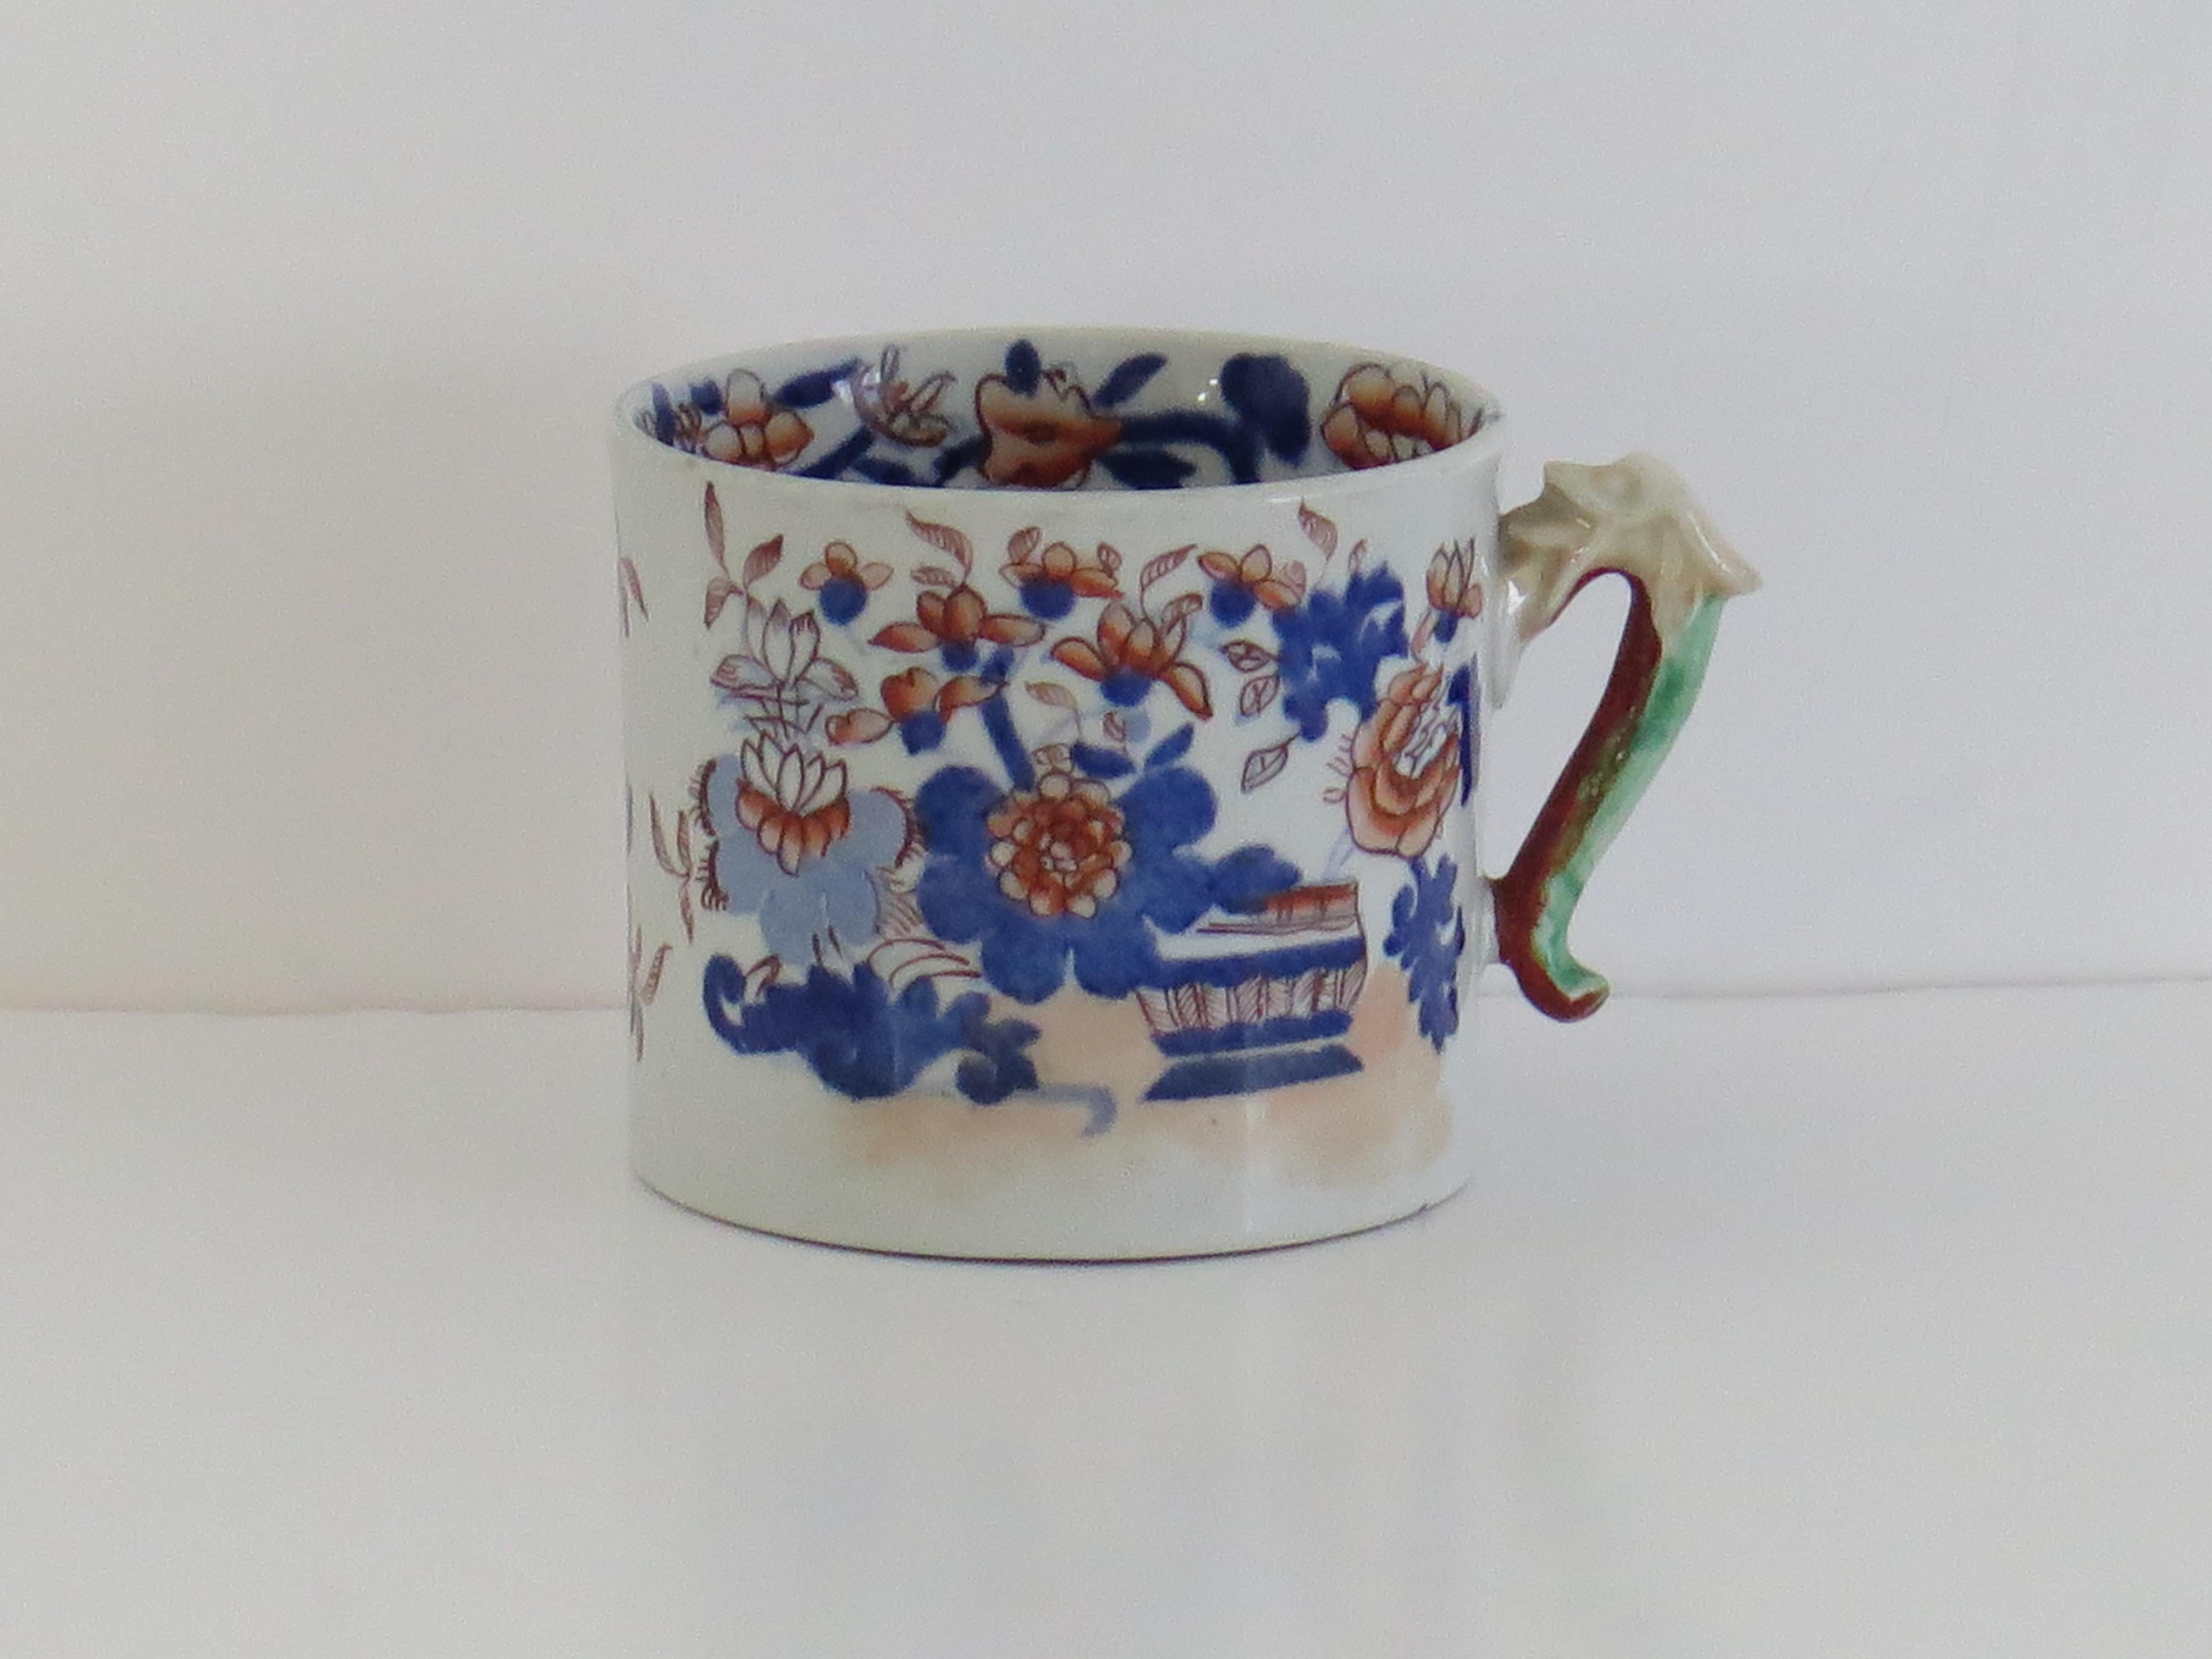 This is a good Ironstone pottery mug made by the English factory of Mason's Ironstone, fully marked and dating to the early 19th century, circa 1820.

Early Mason's mugs tend to be fairly rare and hard to find.

The mug is cylindrical with nominally